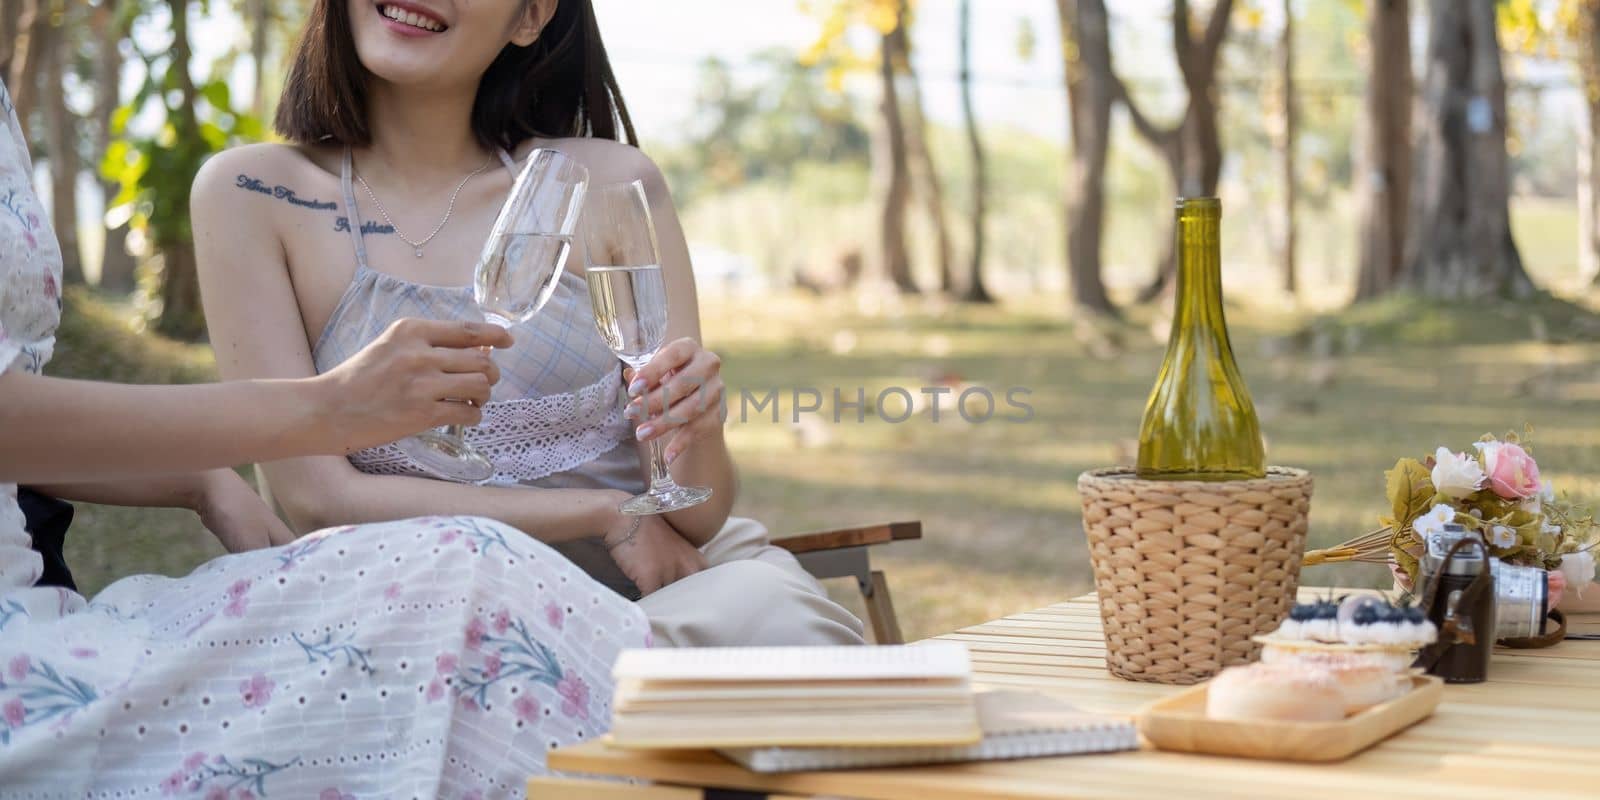 Two beautiful Asian women in lovely dresses enjoying picnic in the park, sipping white wine, sitting on picnic chairs.